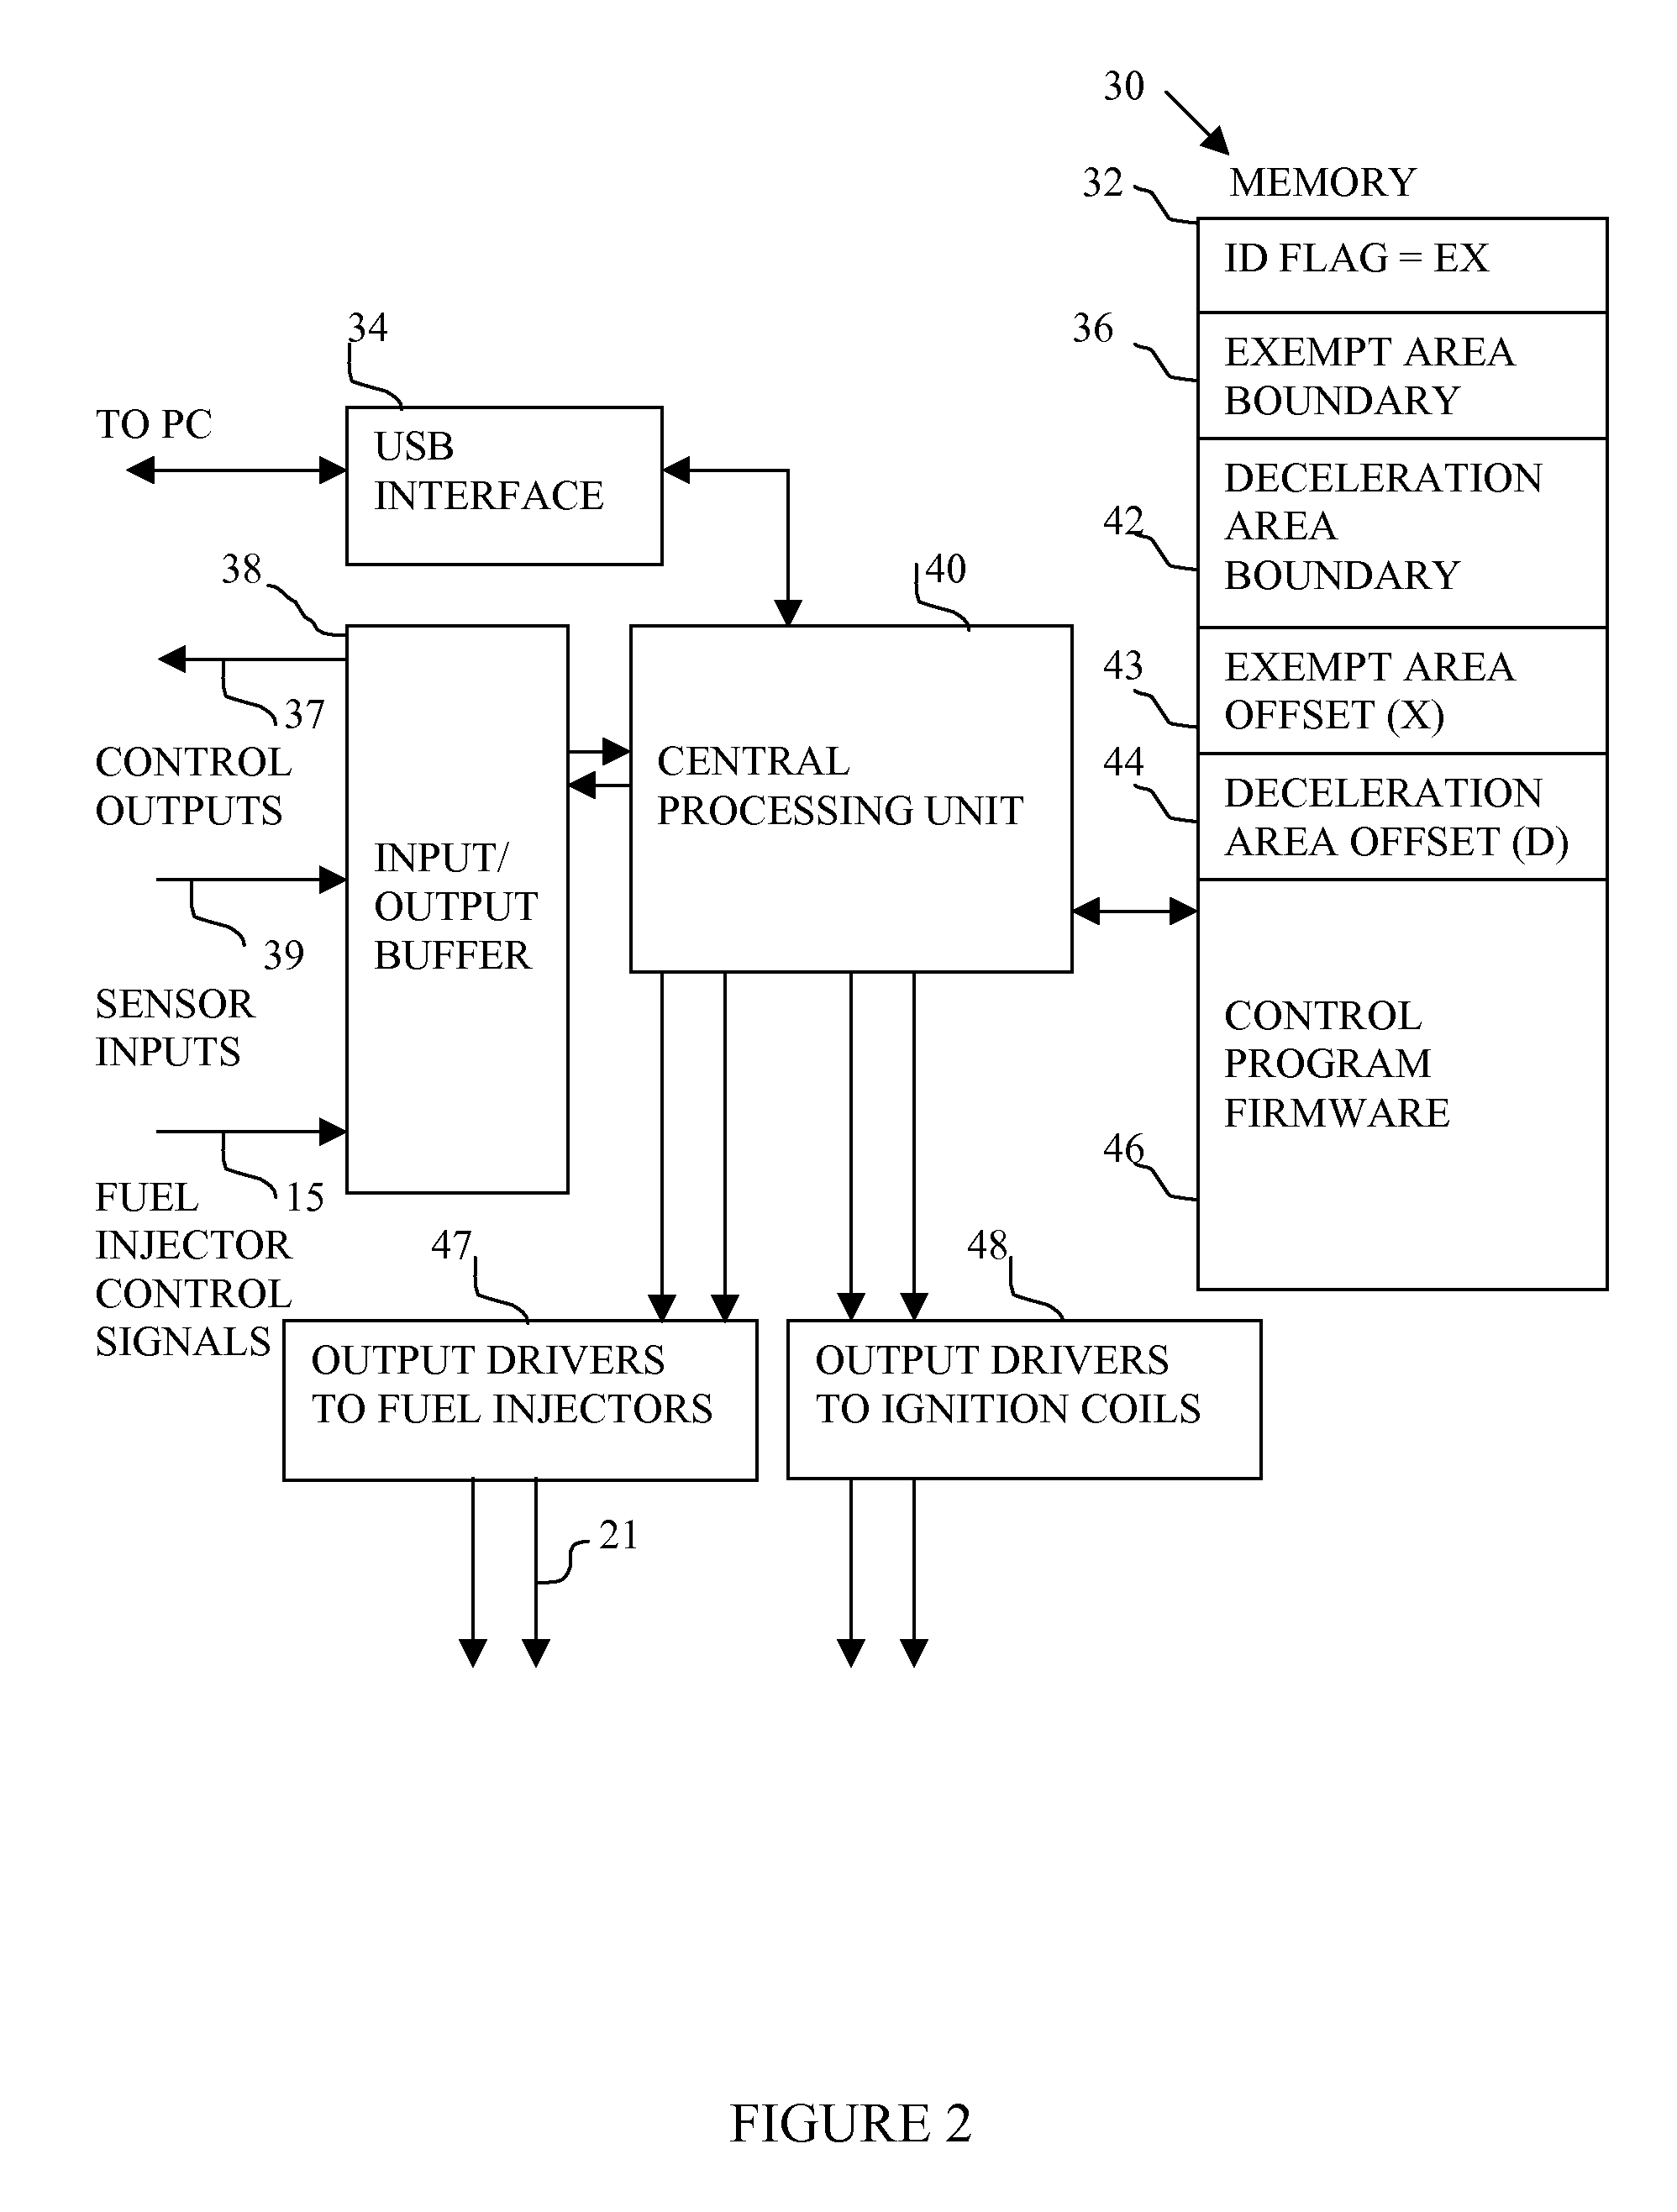 Fuel injection control system with exempt area of fuel map